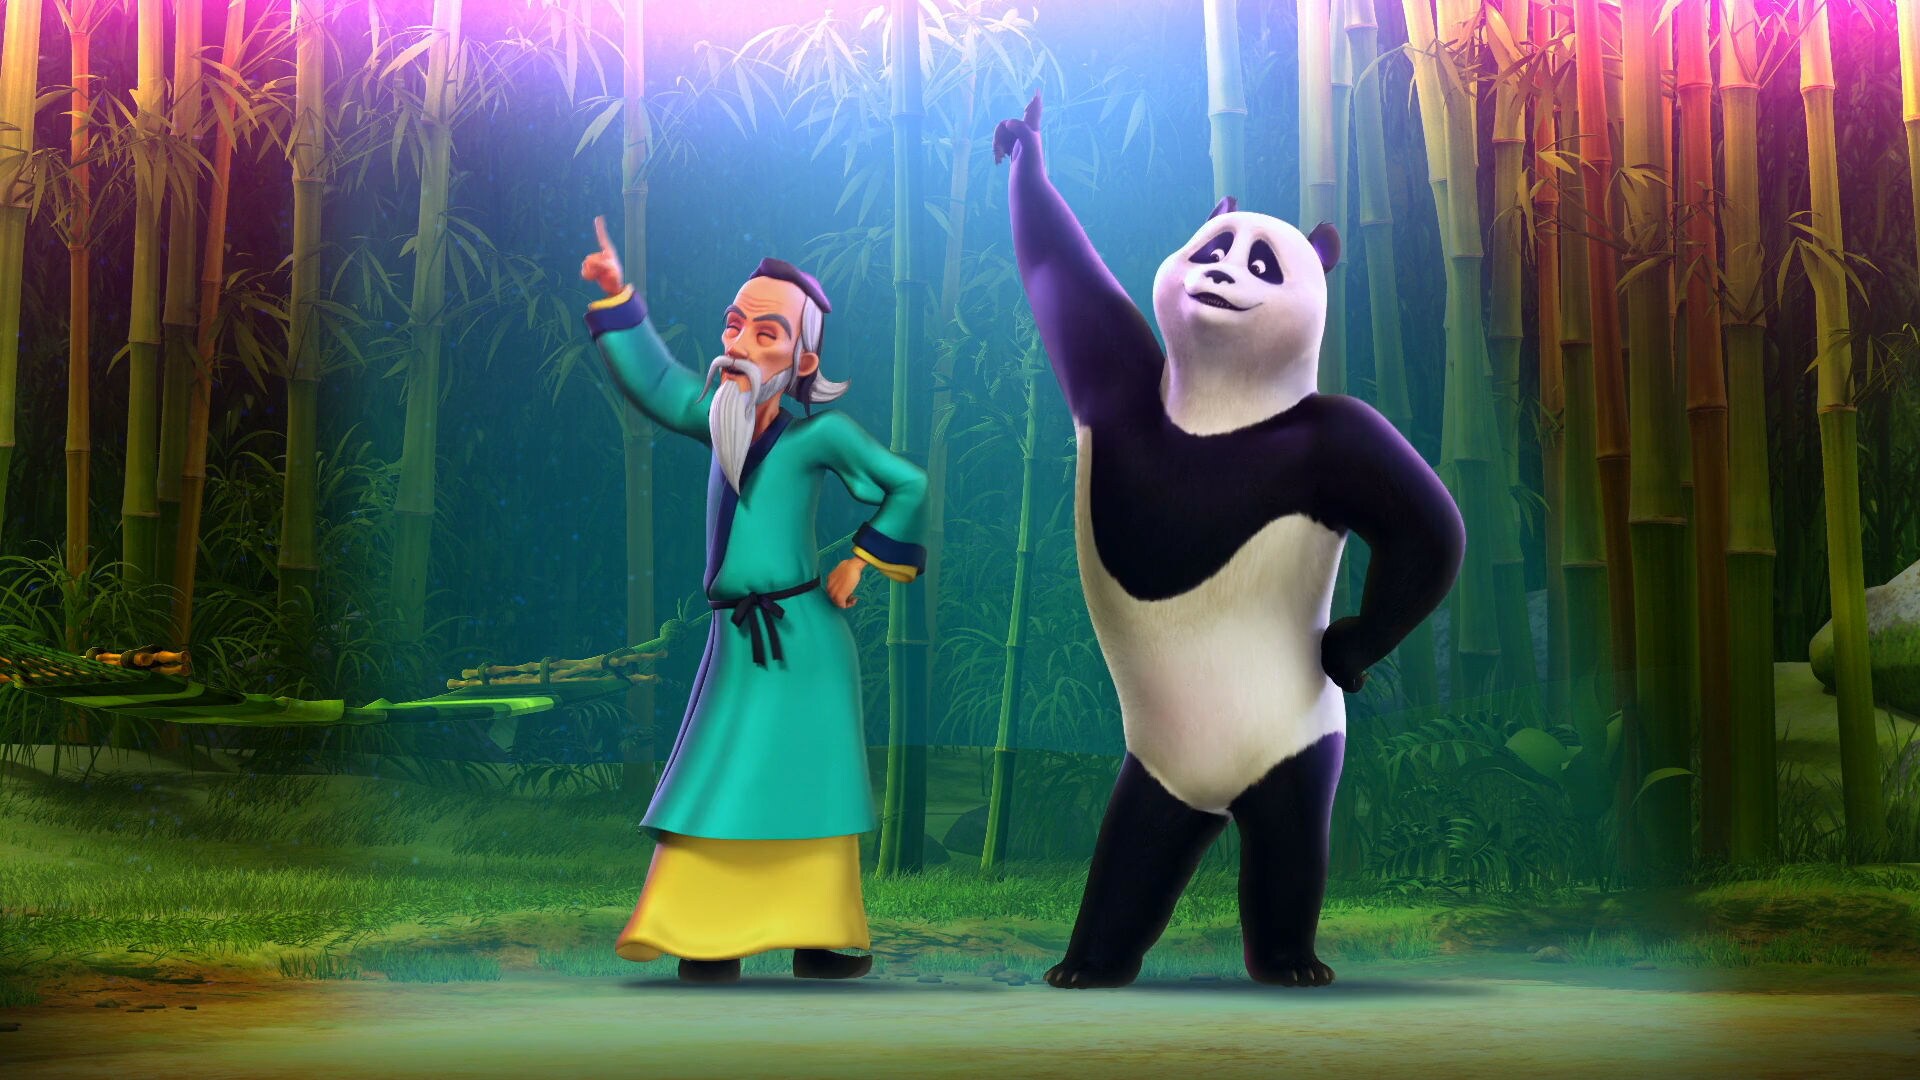 This Panda Just Wants to Dance